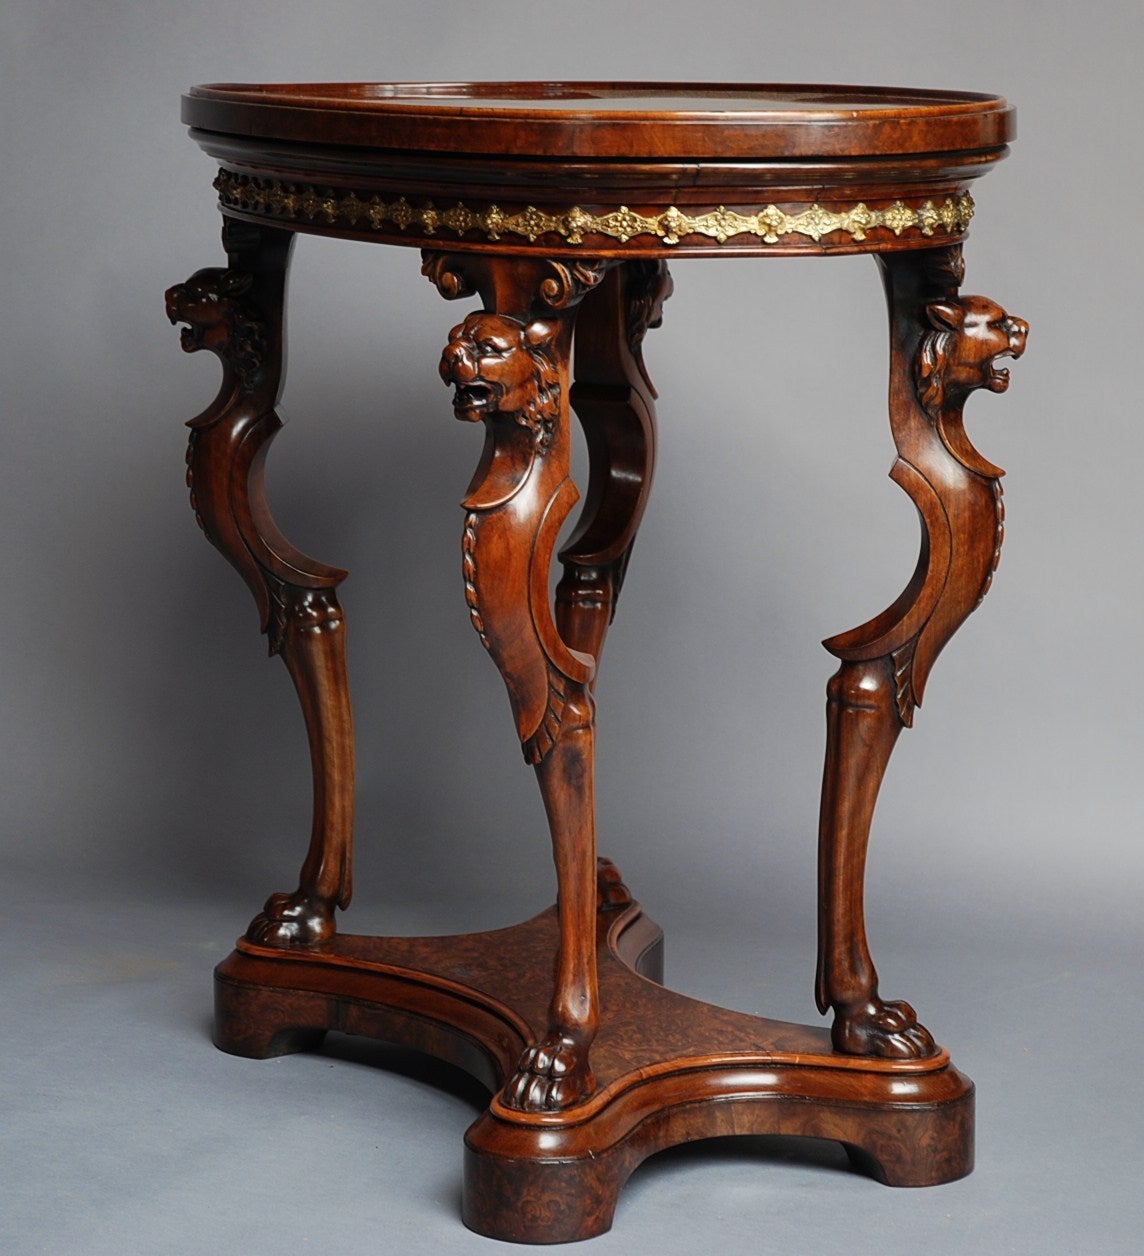 British Mid-19th Century Burr Walnut Centre Table by Holland & Sons